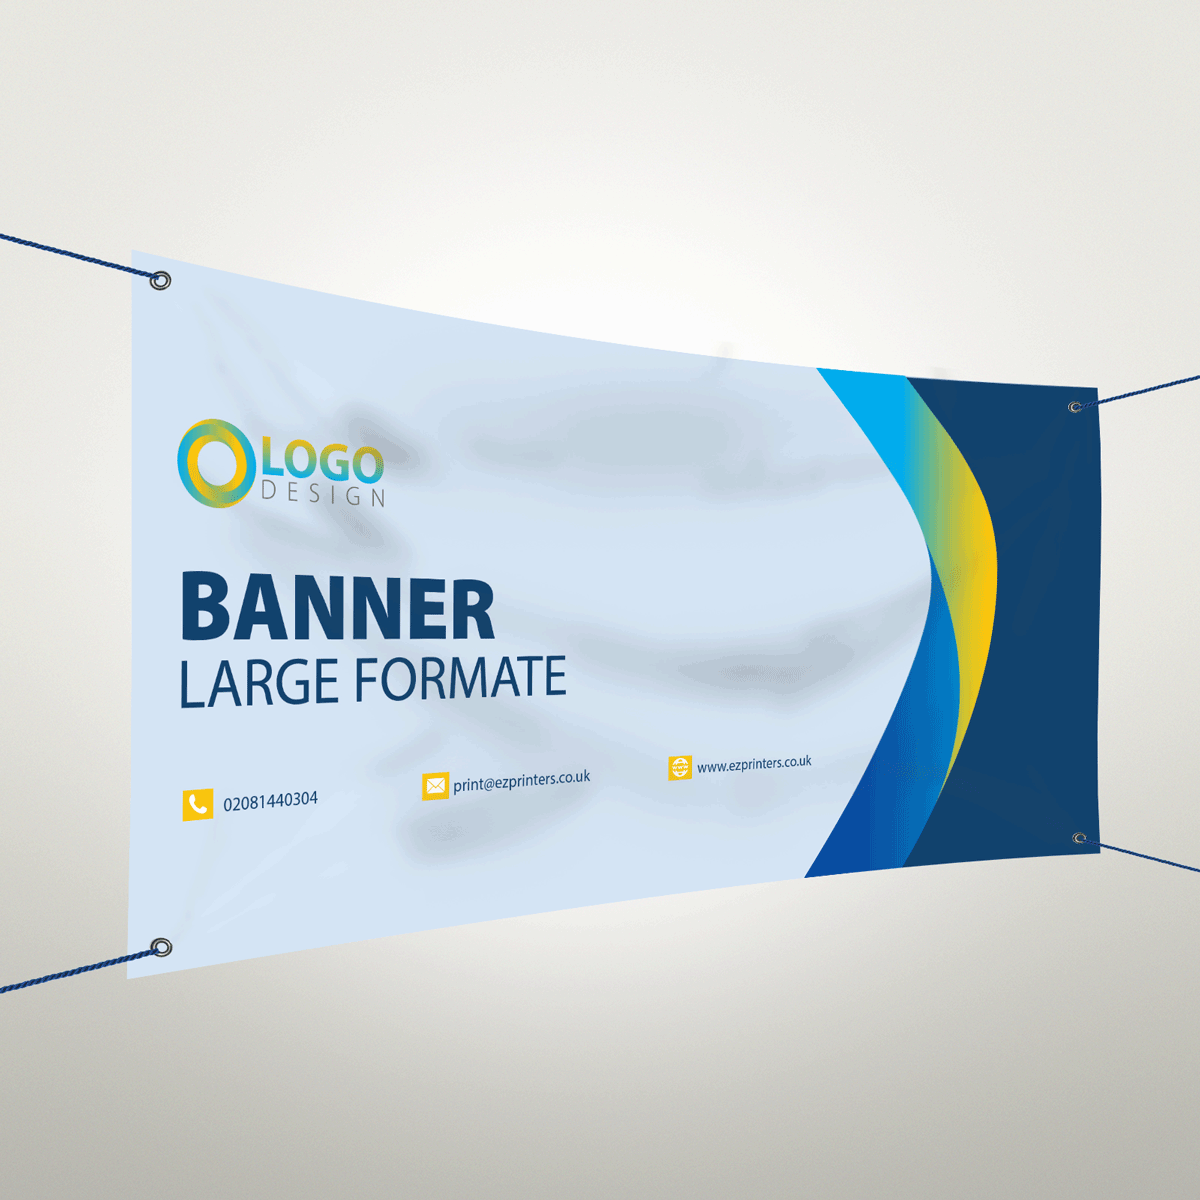 cheap high quality roller banner printing company in london ec1 near me